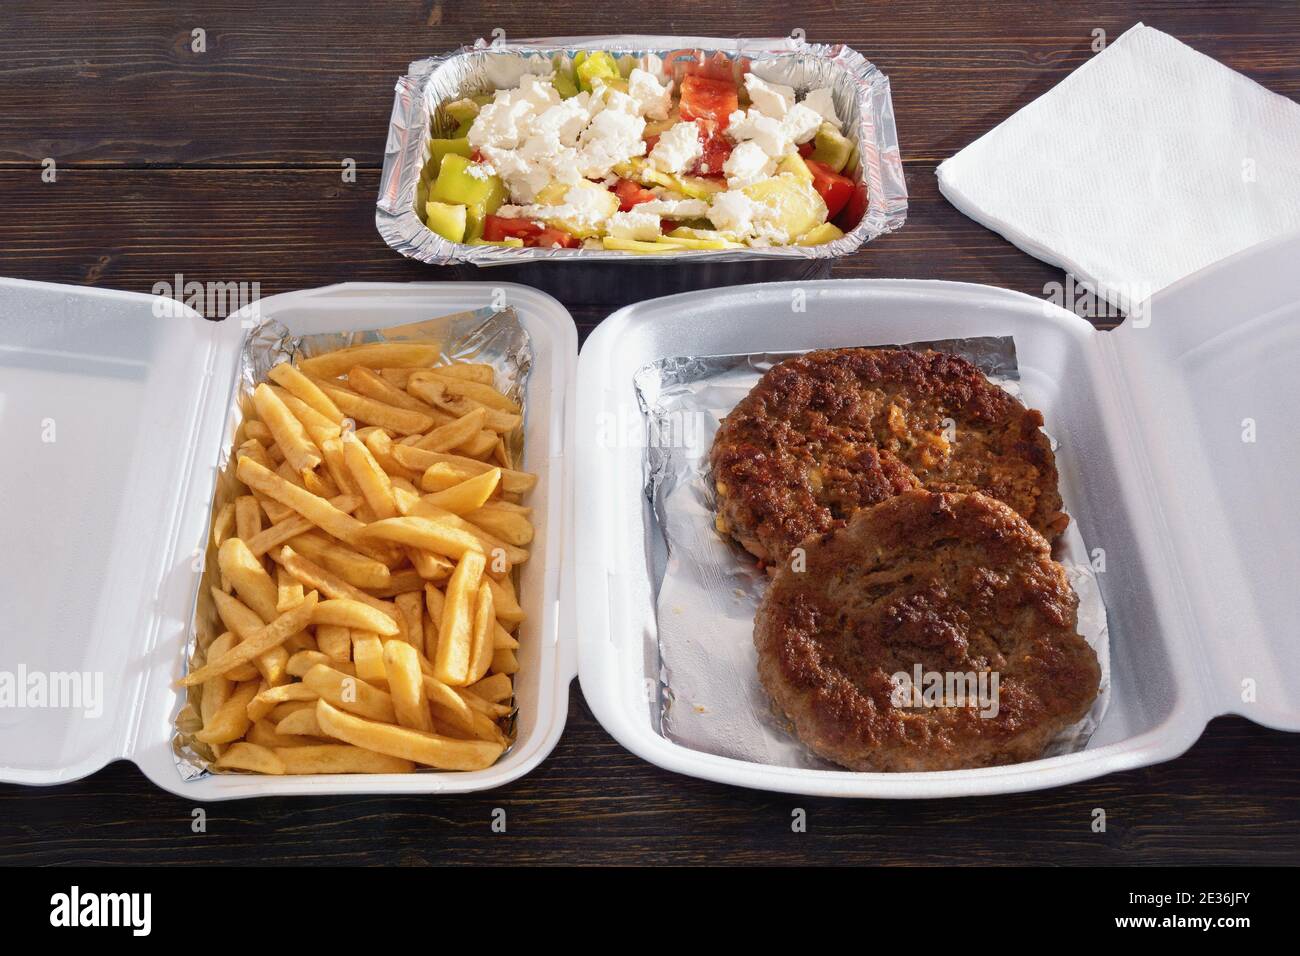 Food delivery. Balkan cuisine. Pljeskavica - grilled dish of minced meat;  french fries and salad in takeaway containers on rustic wooden table Stock Photo